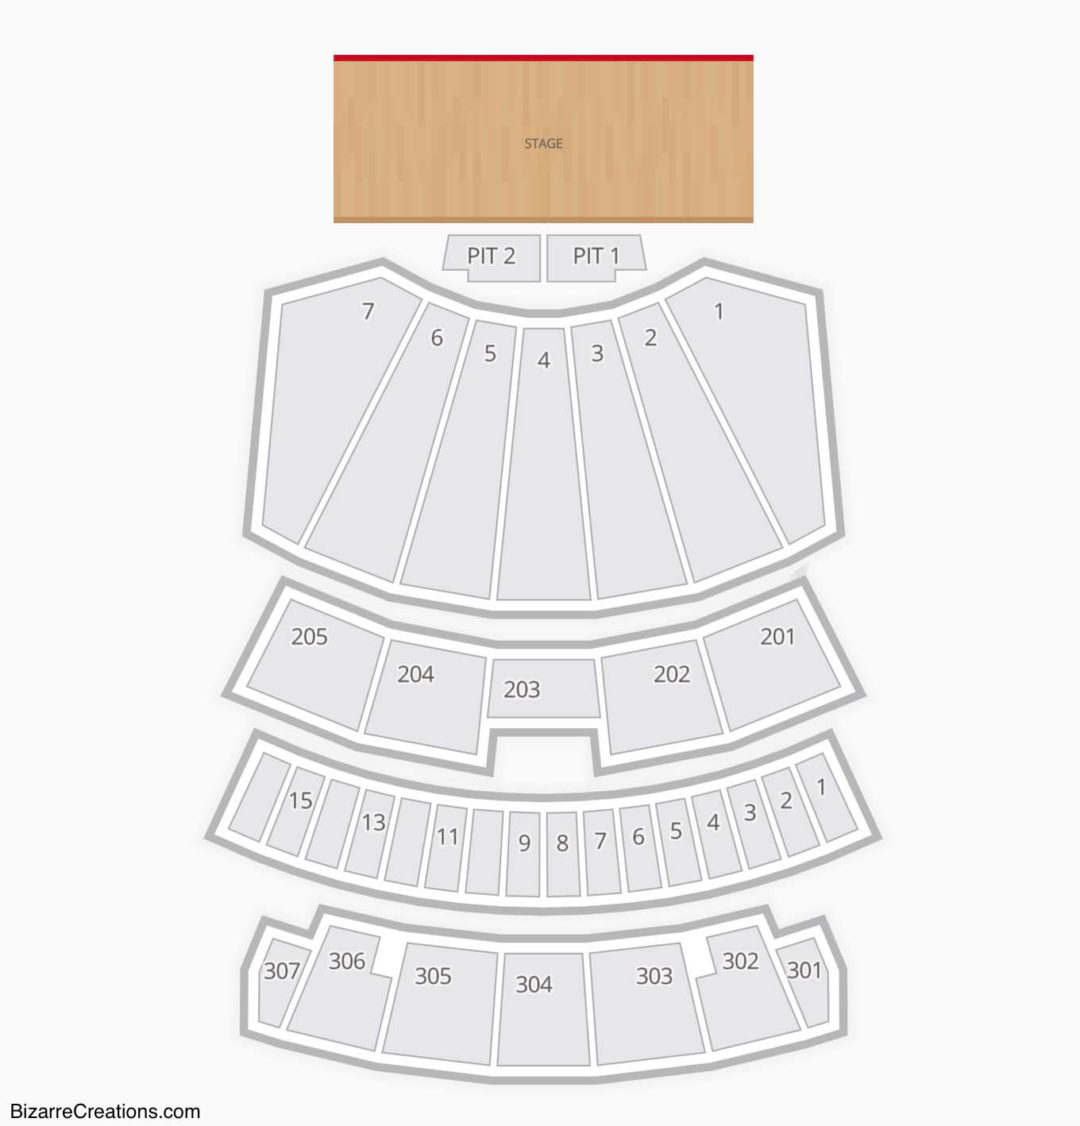 Comerica Theatre Seating Chart | Seating Charts & Tickets1080 x 1126